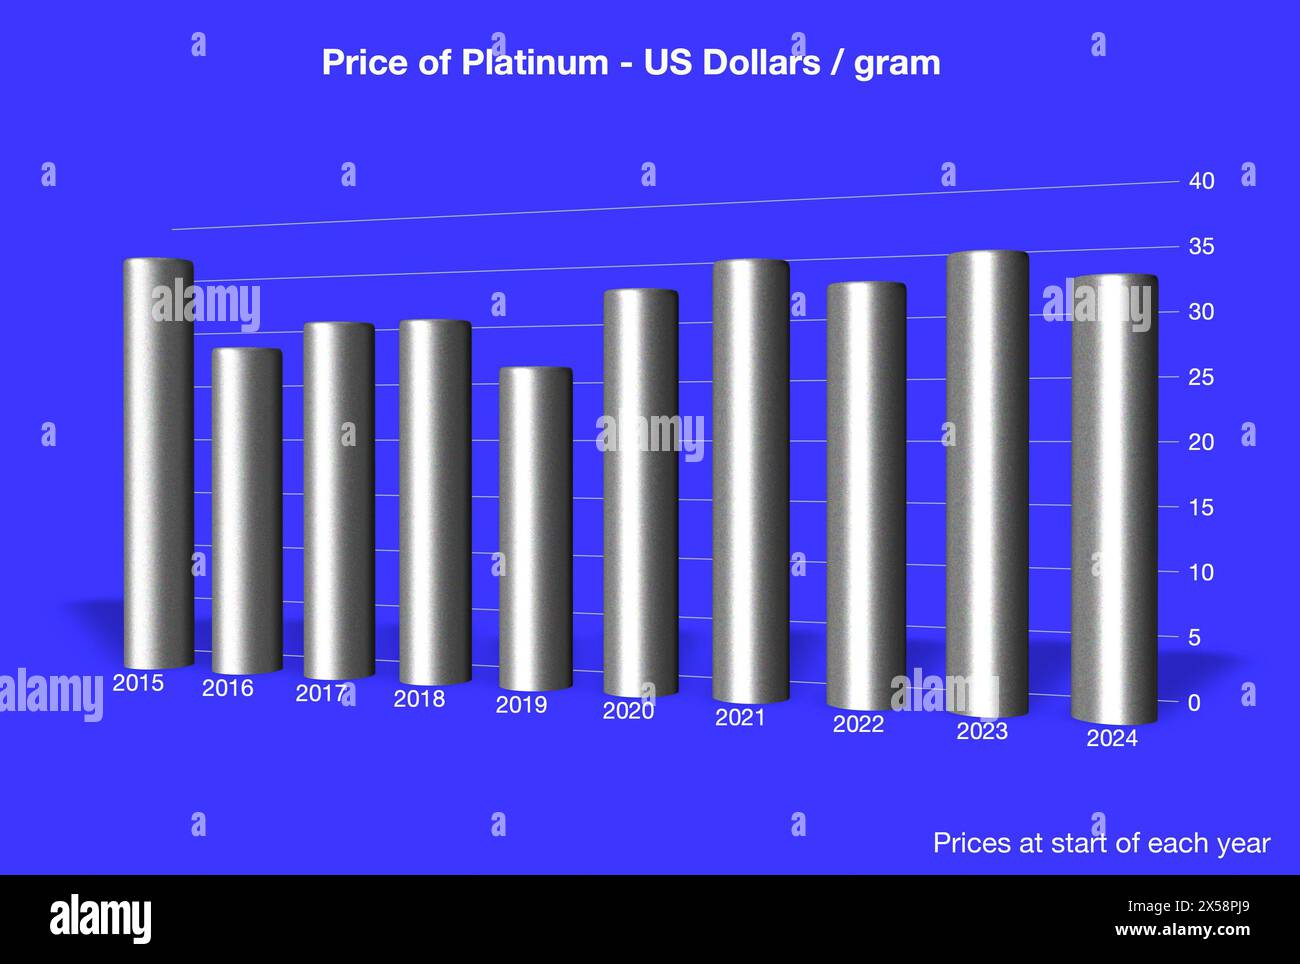 Platinum price bar chart / graph with 3D effect showing actual price in US Dollars at the start of each year from 2015-2024 Stock Photo